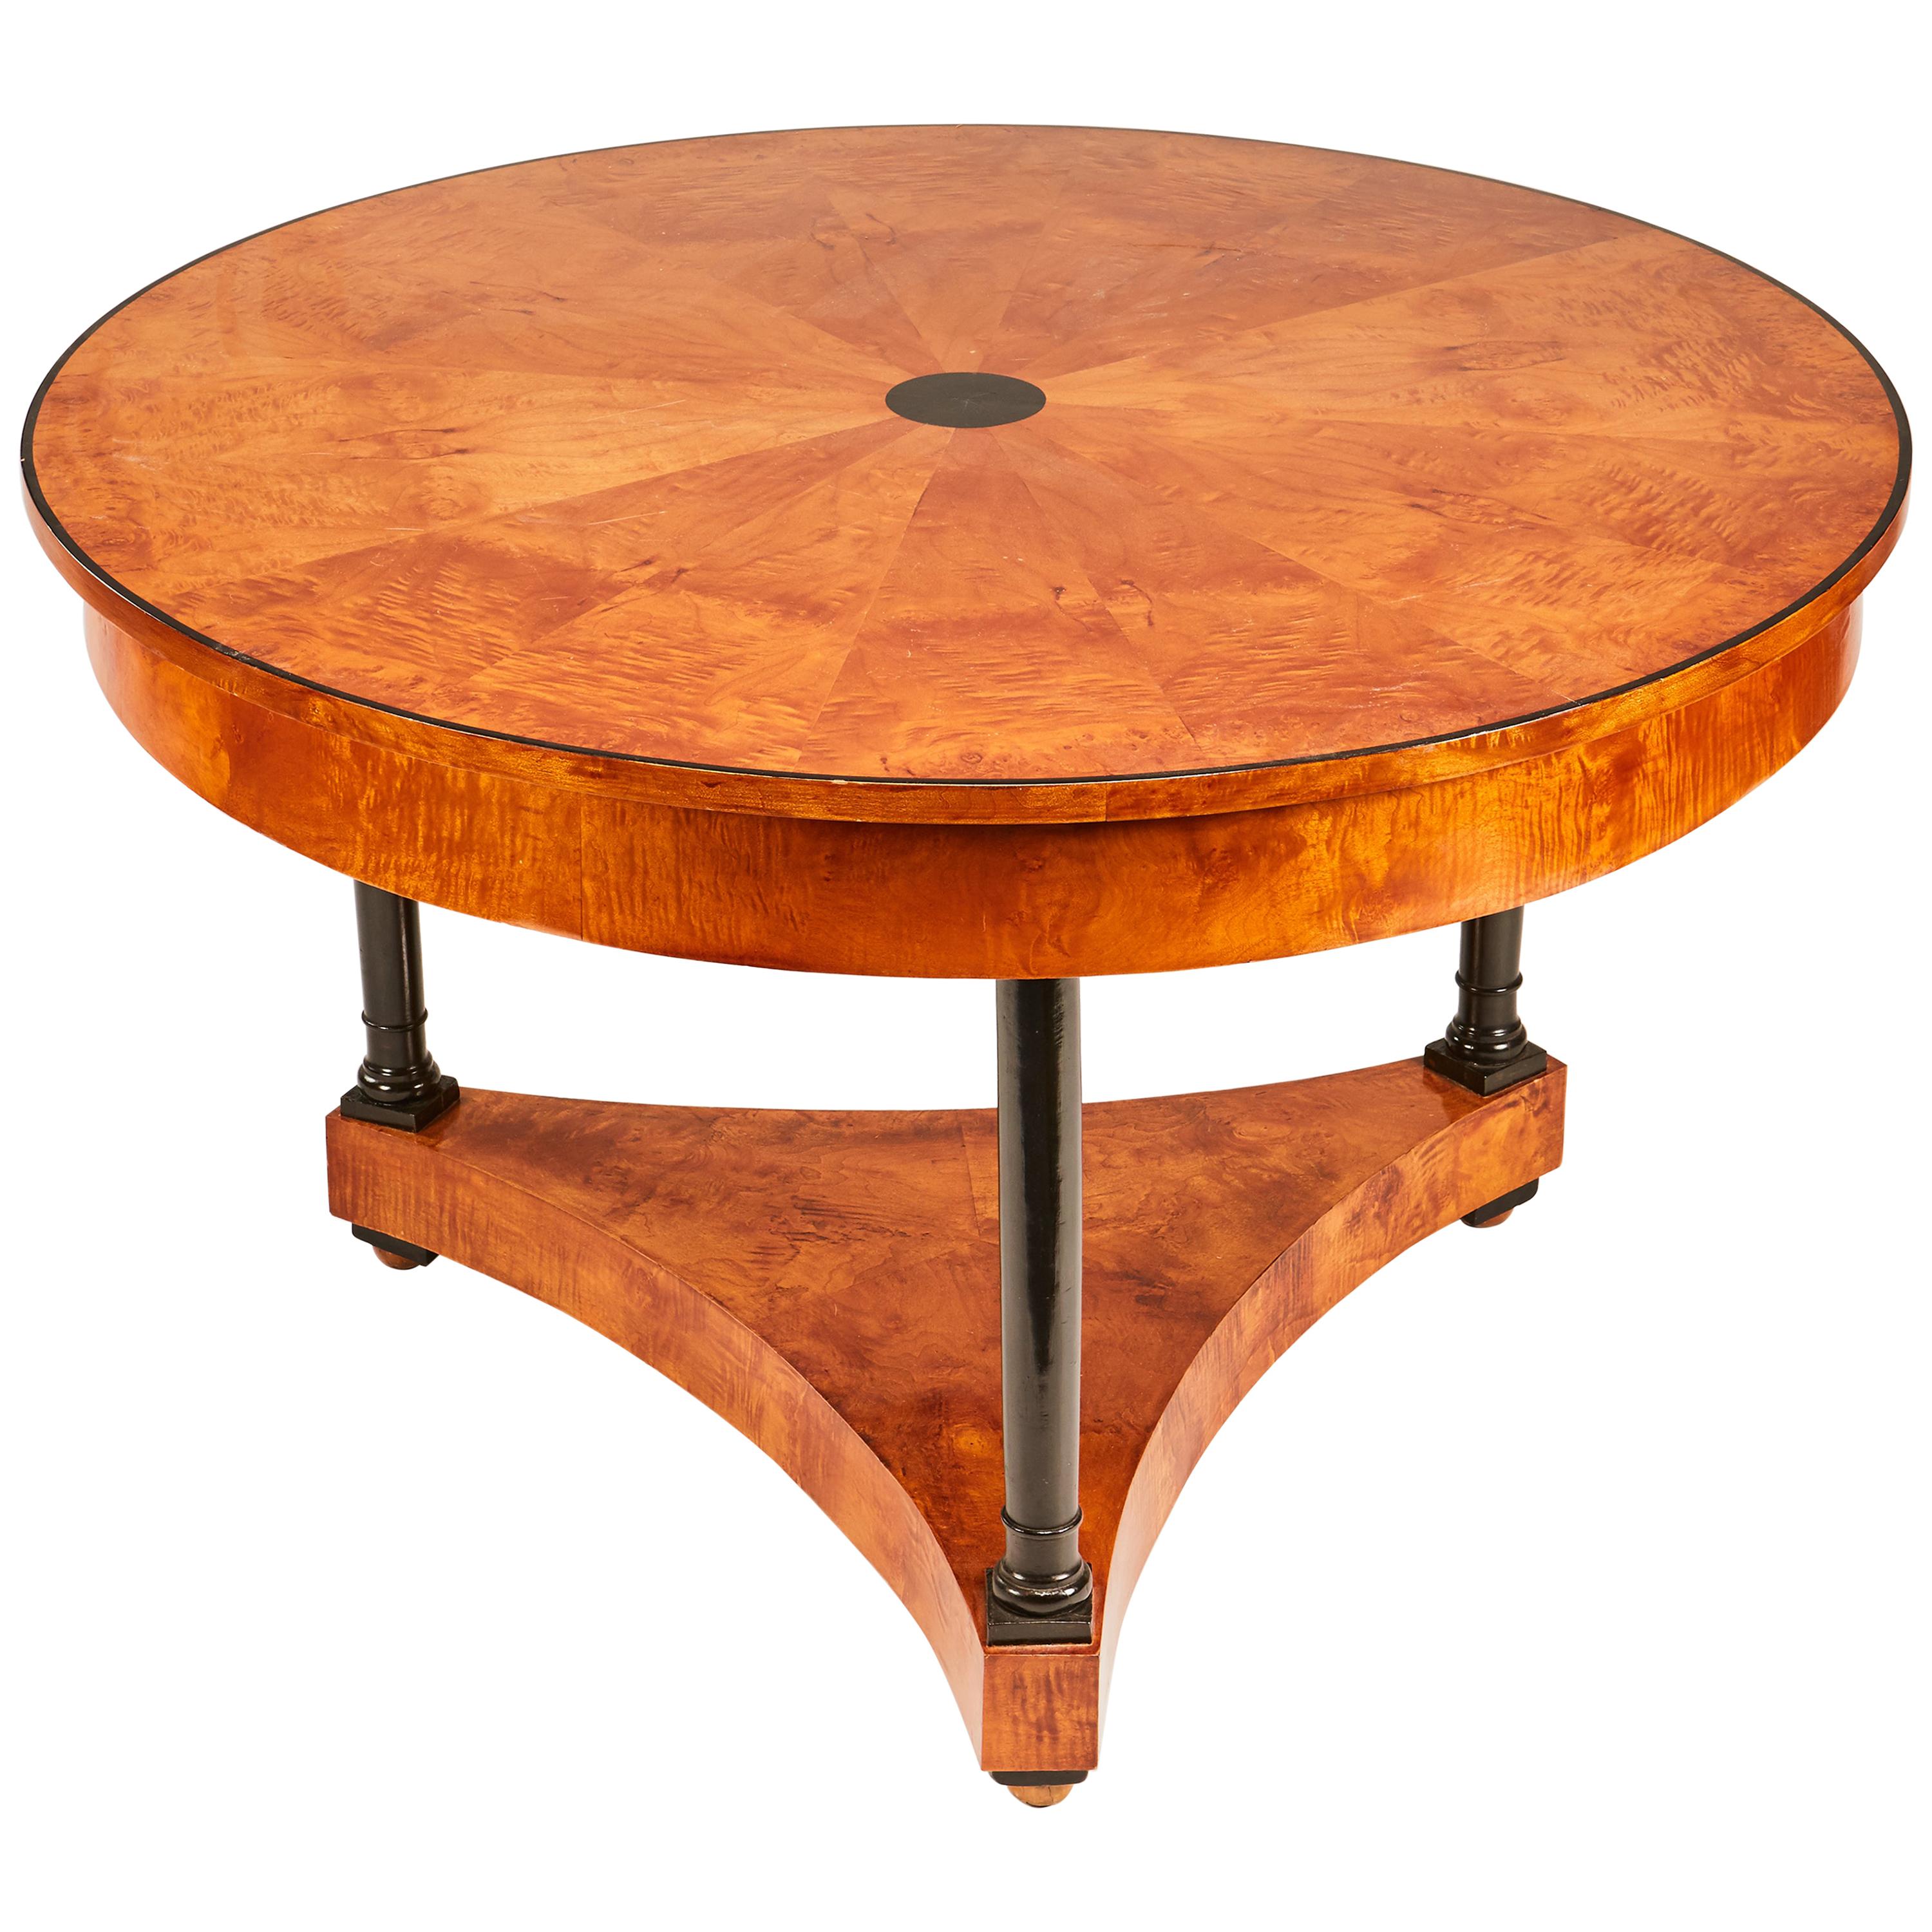 19th Century Biedermeier Center or Round Dining Table with Columns on Ball Feet